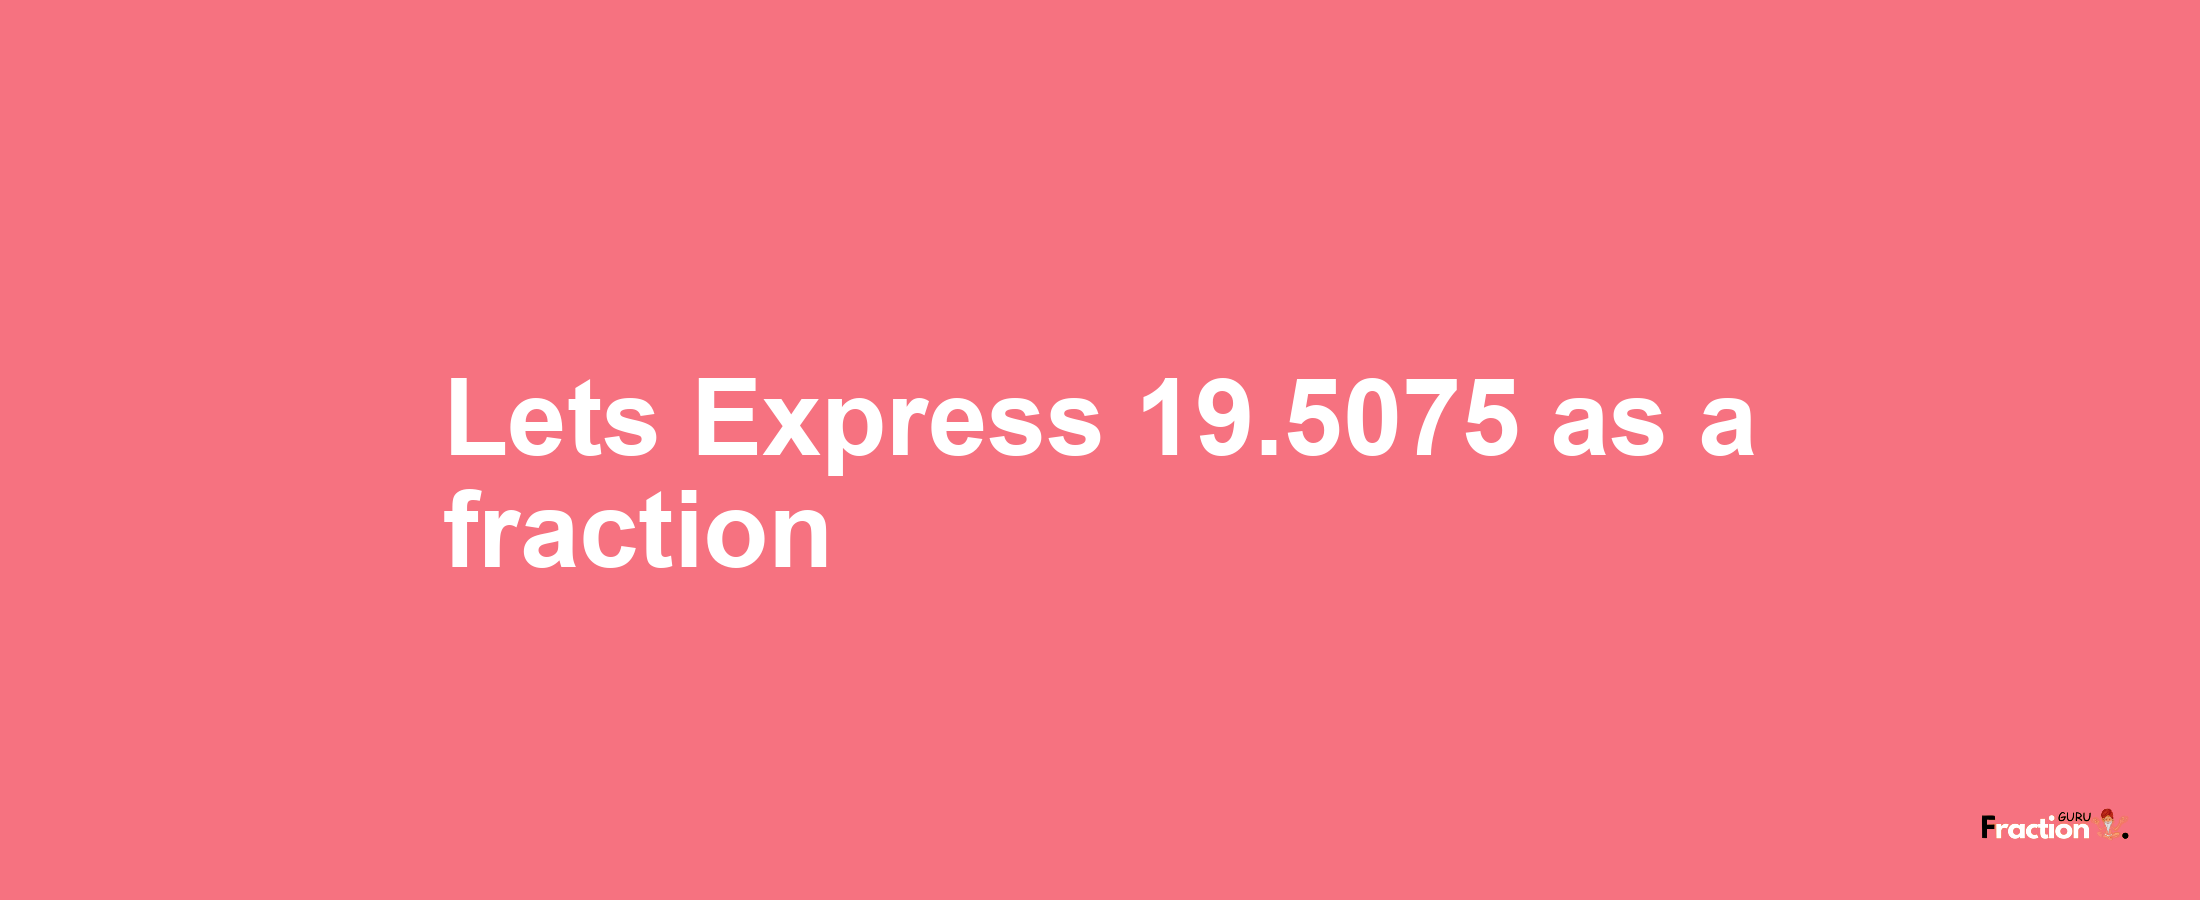 Lets Express 19.5075 as afraction